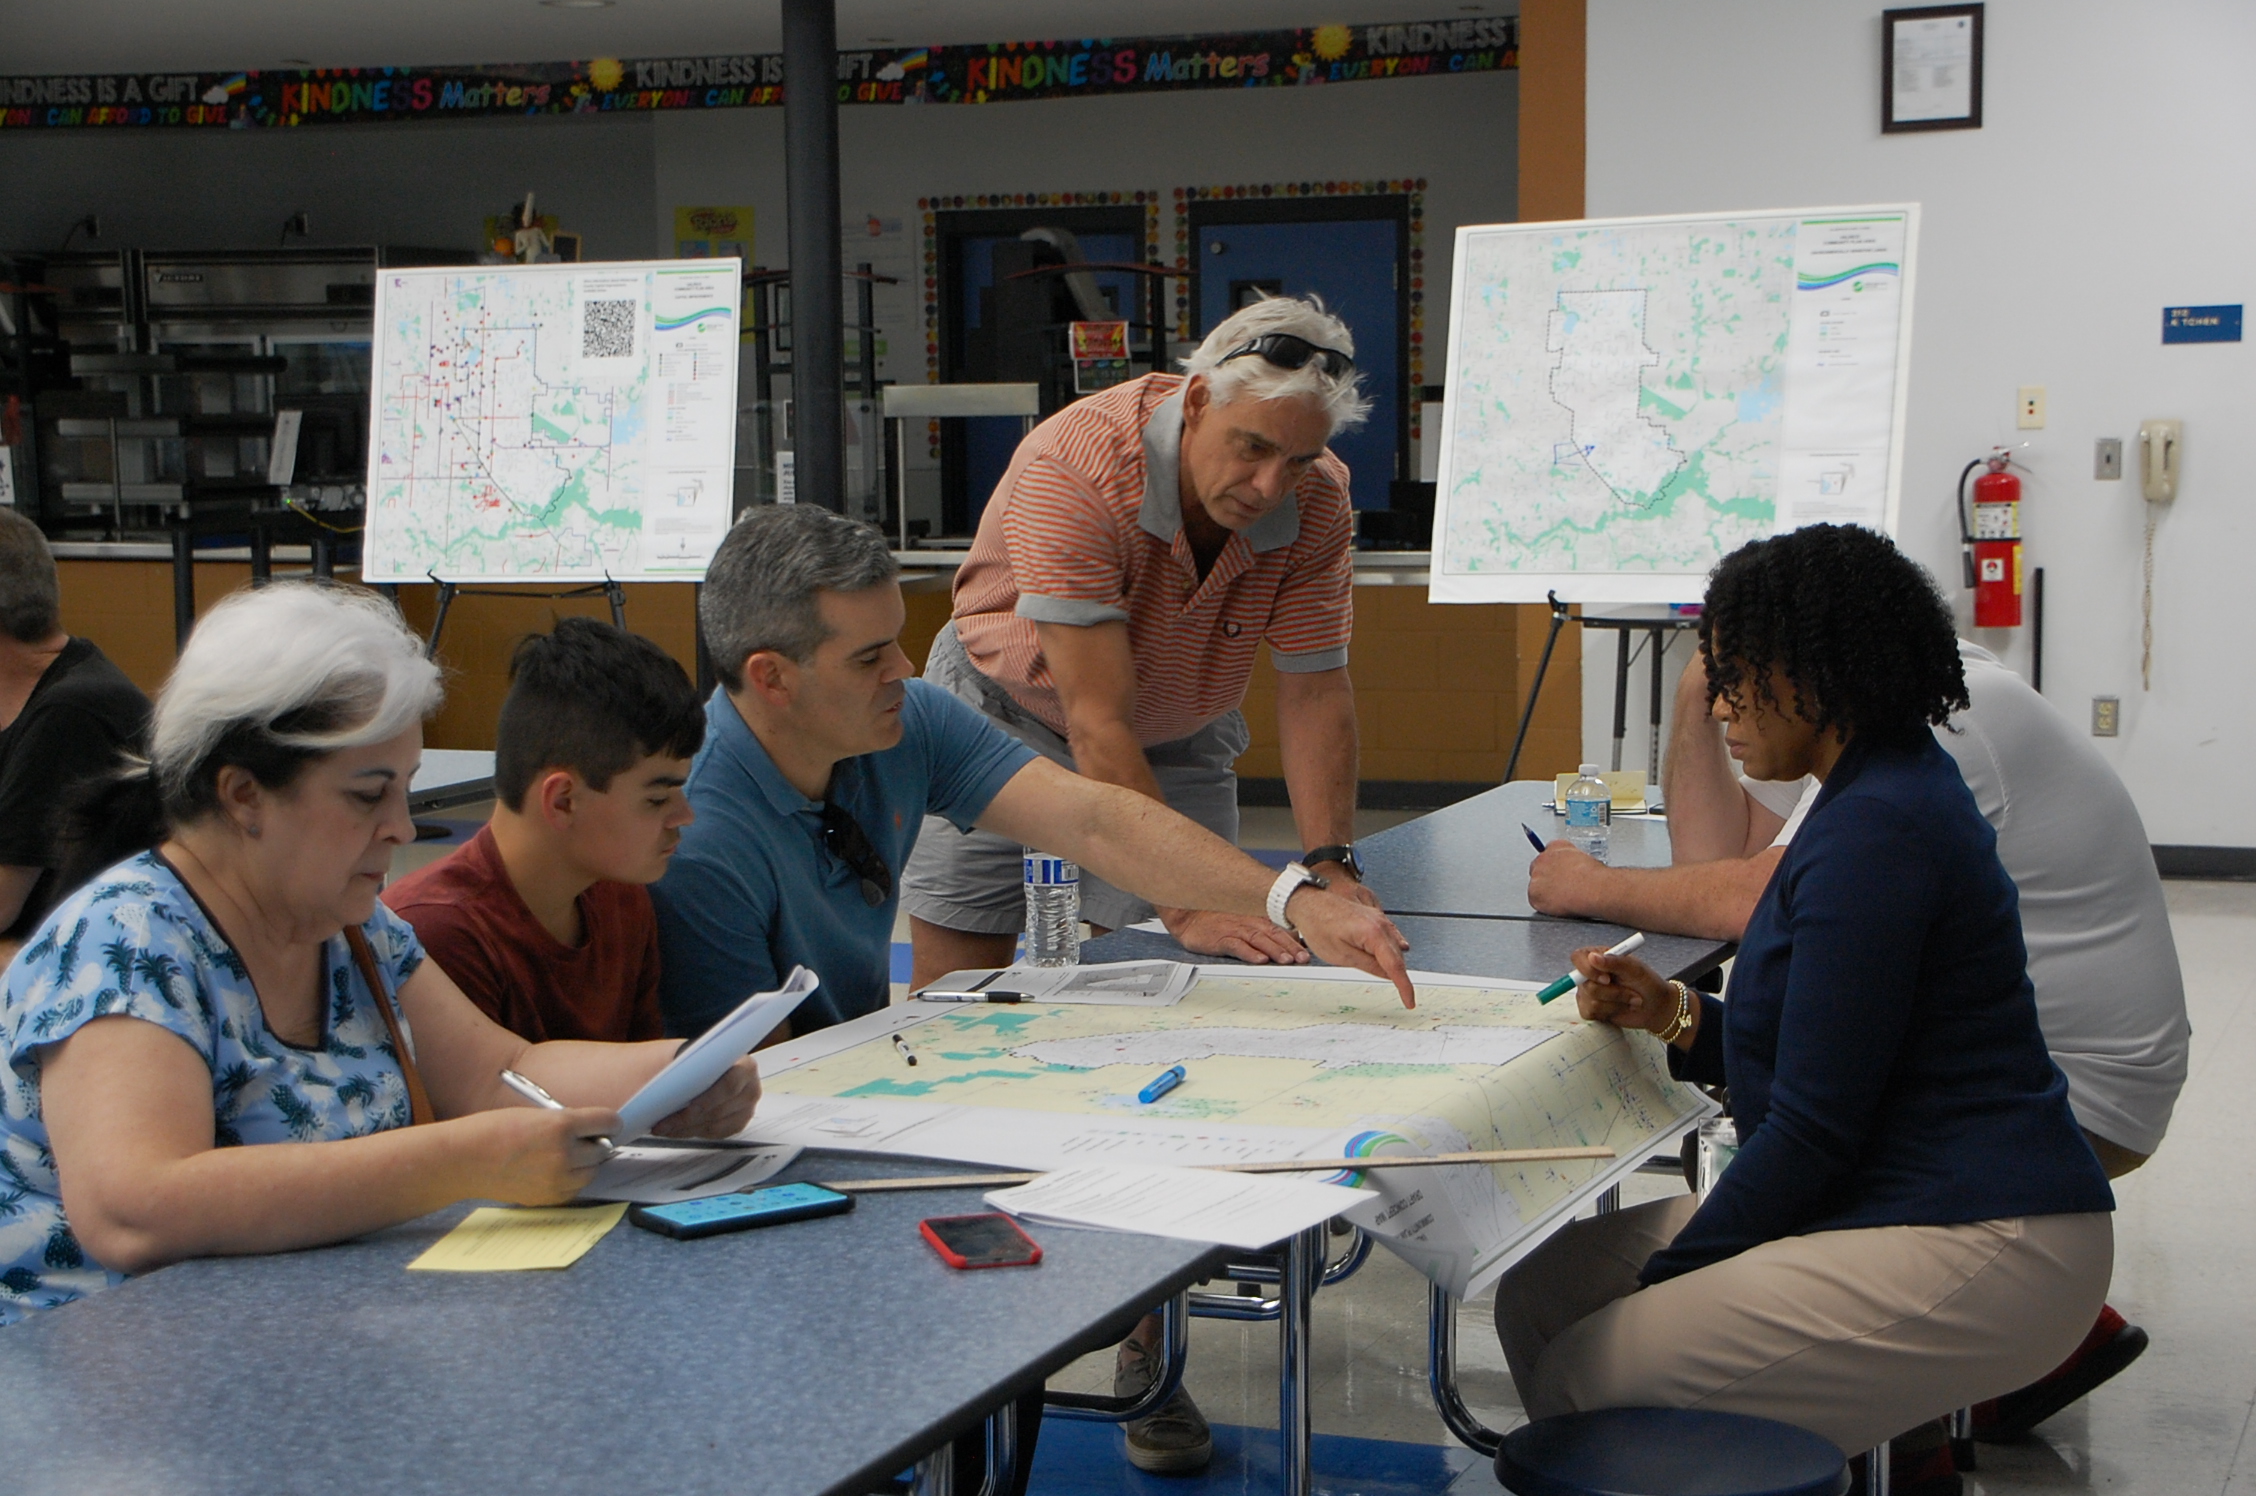 Community members gathered around a cafeteria table discussing a map of Valrico.